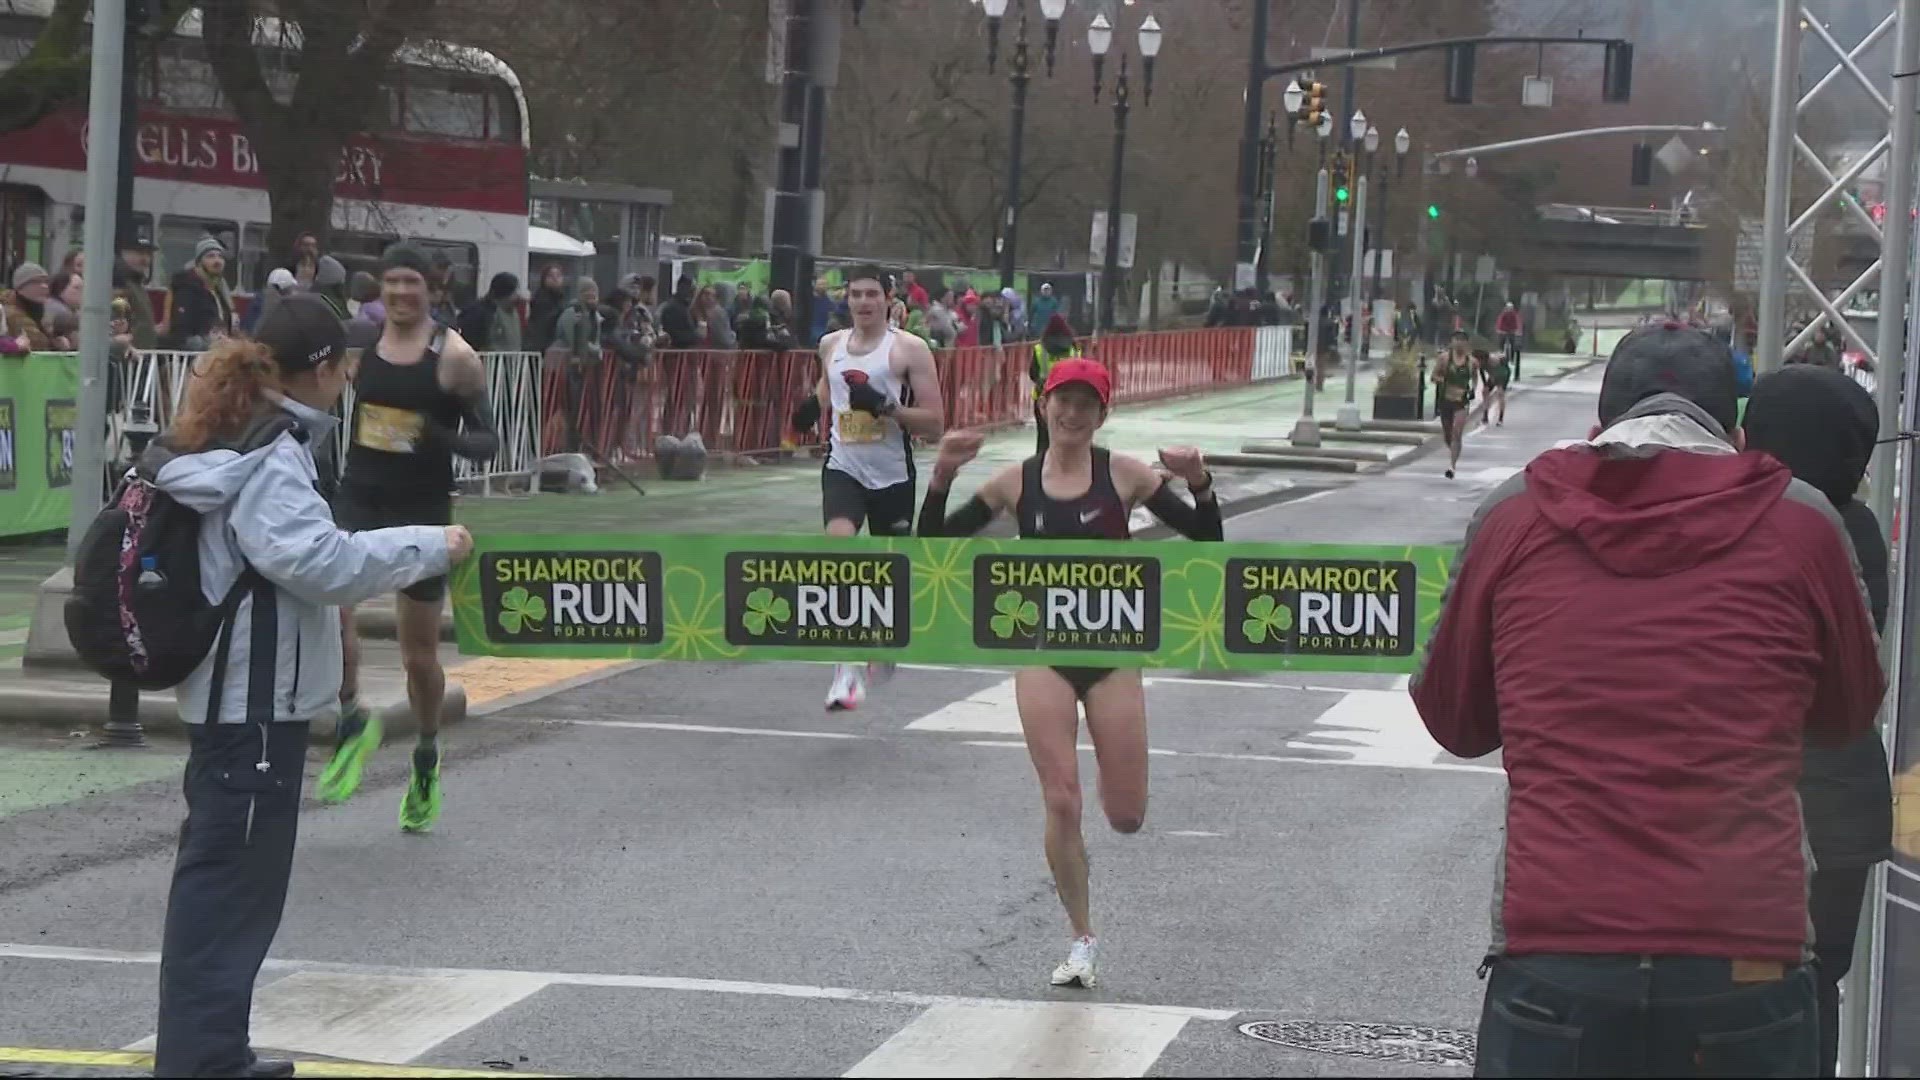 Many across Portland celebrated St. Patrick's Day this weekend, from the Shamrock Run in downtown to a St. Patrick's Day Parade in Northeast Portland.